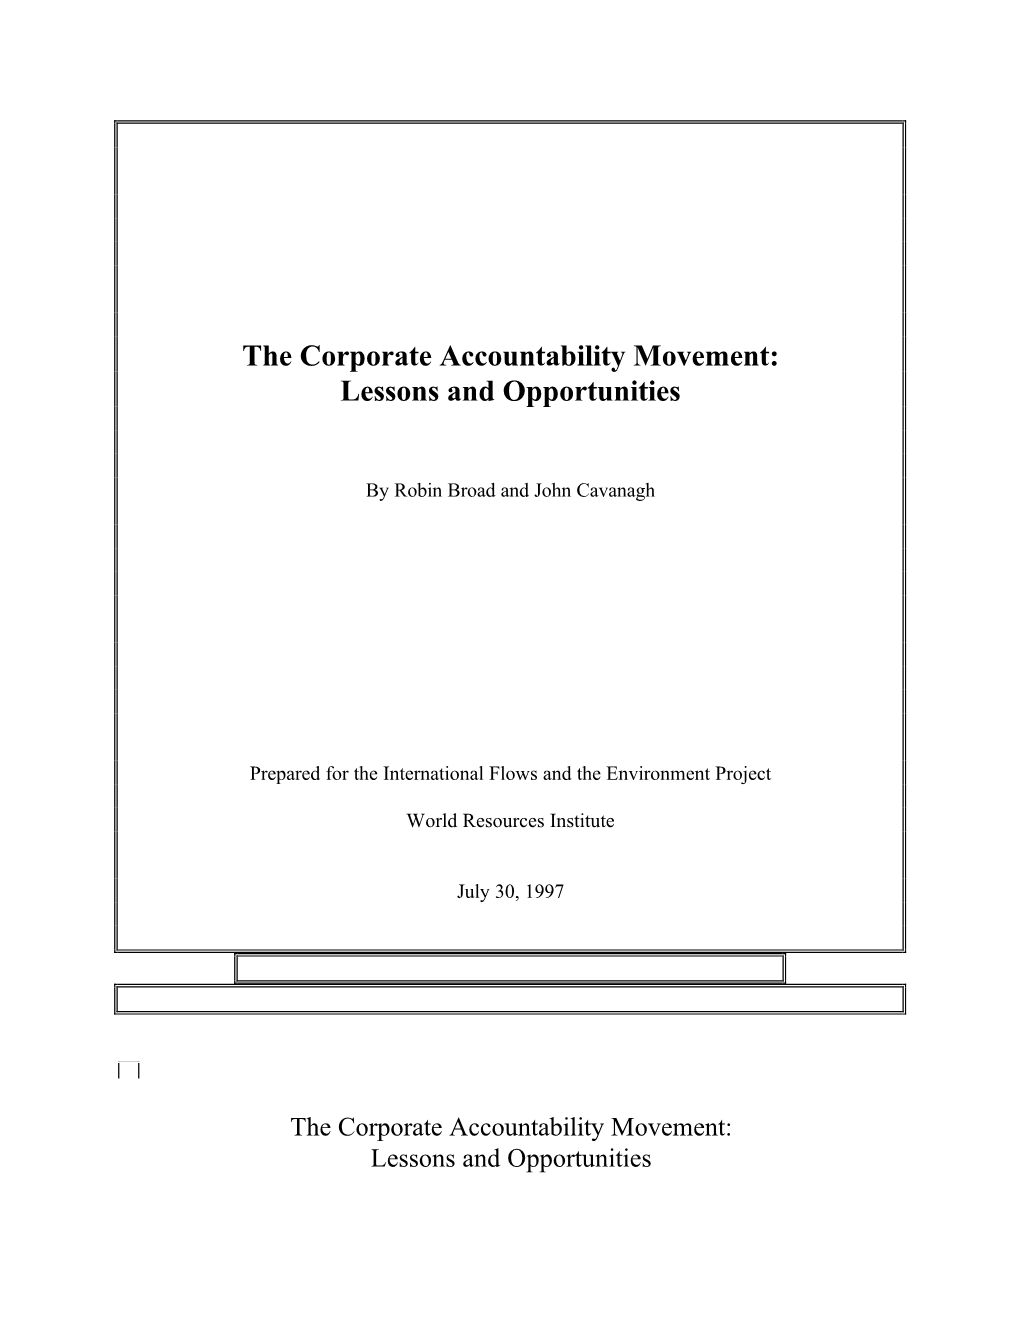 The Corporate Accountability Movement: Lessons and Opportunities